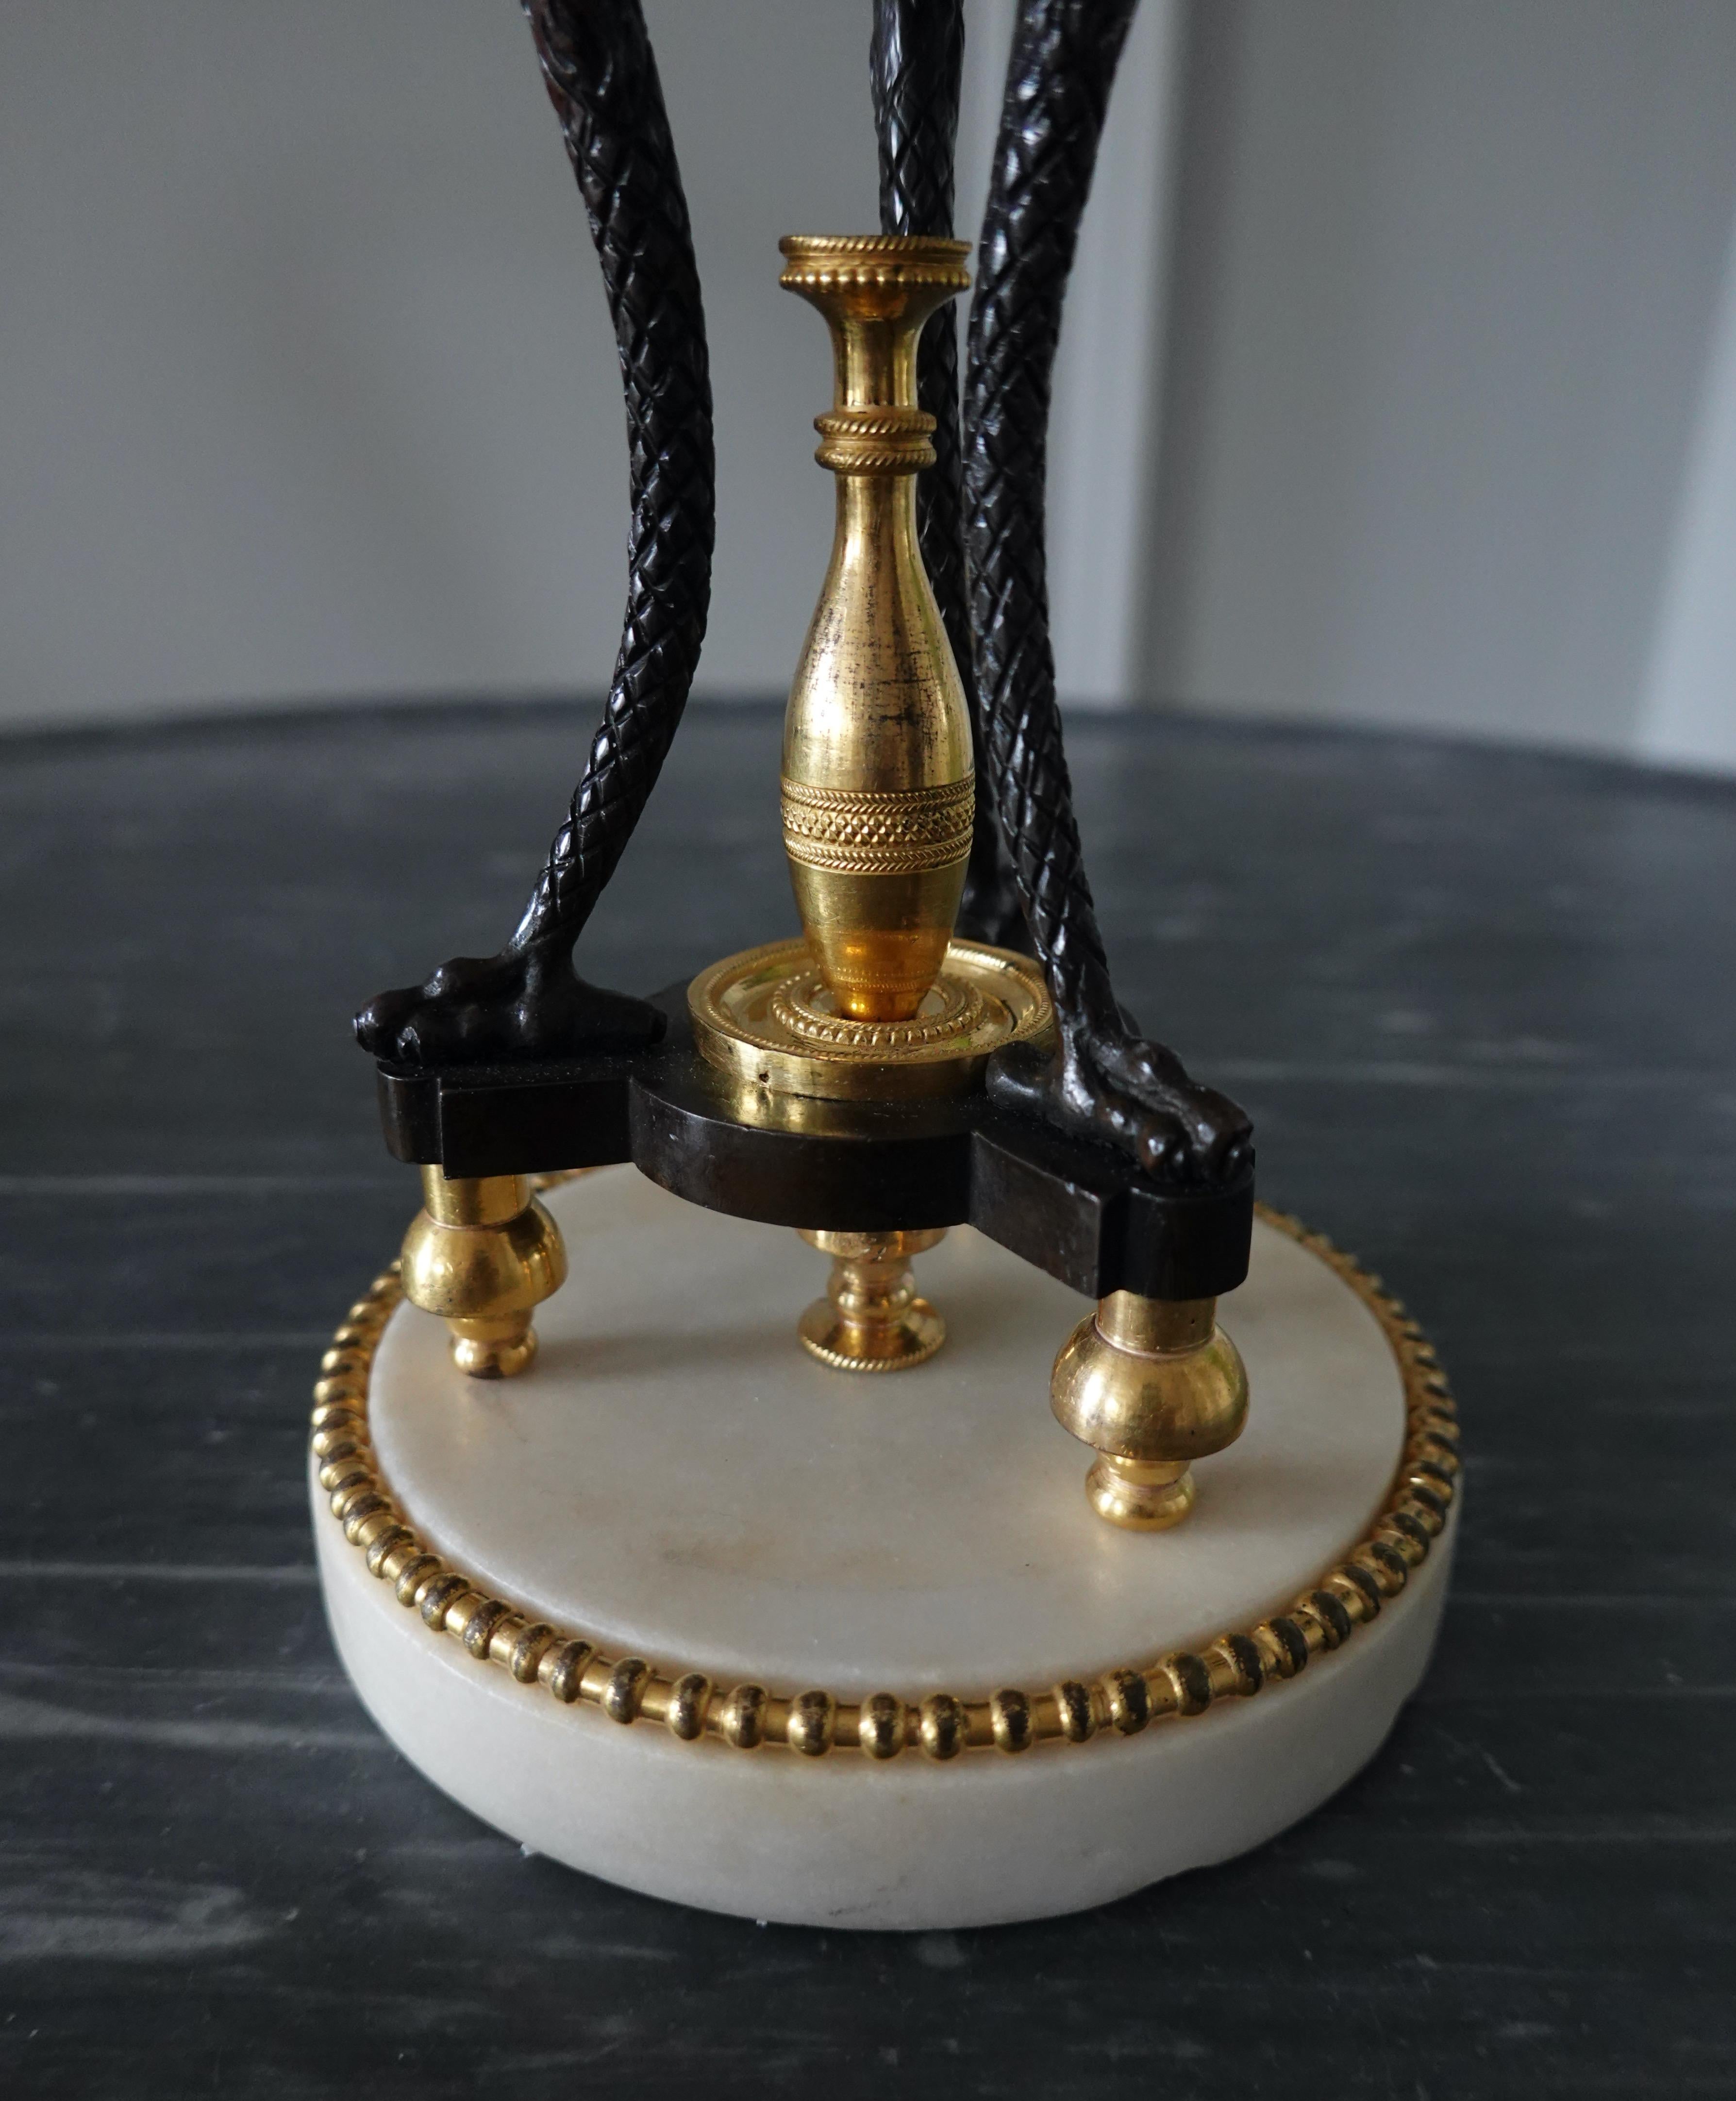 Late 18th Century Pair of 18th Century English Candlesticks Attributed to Matthew Boulton